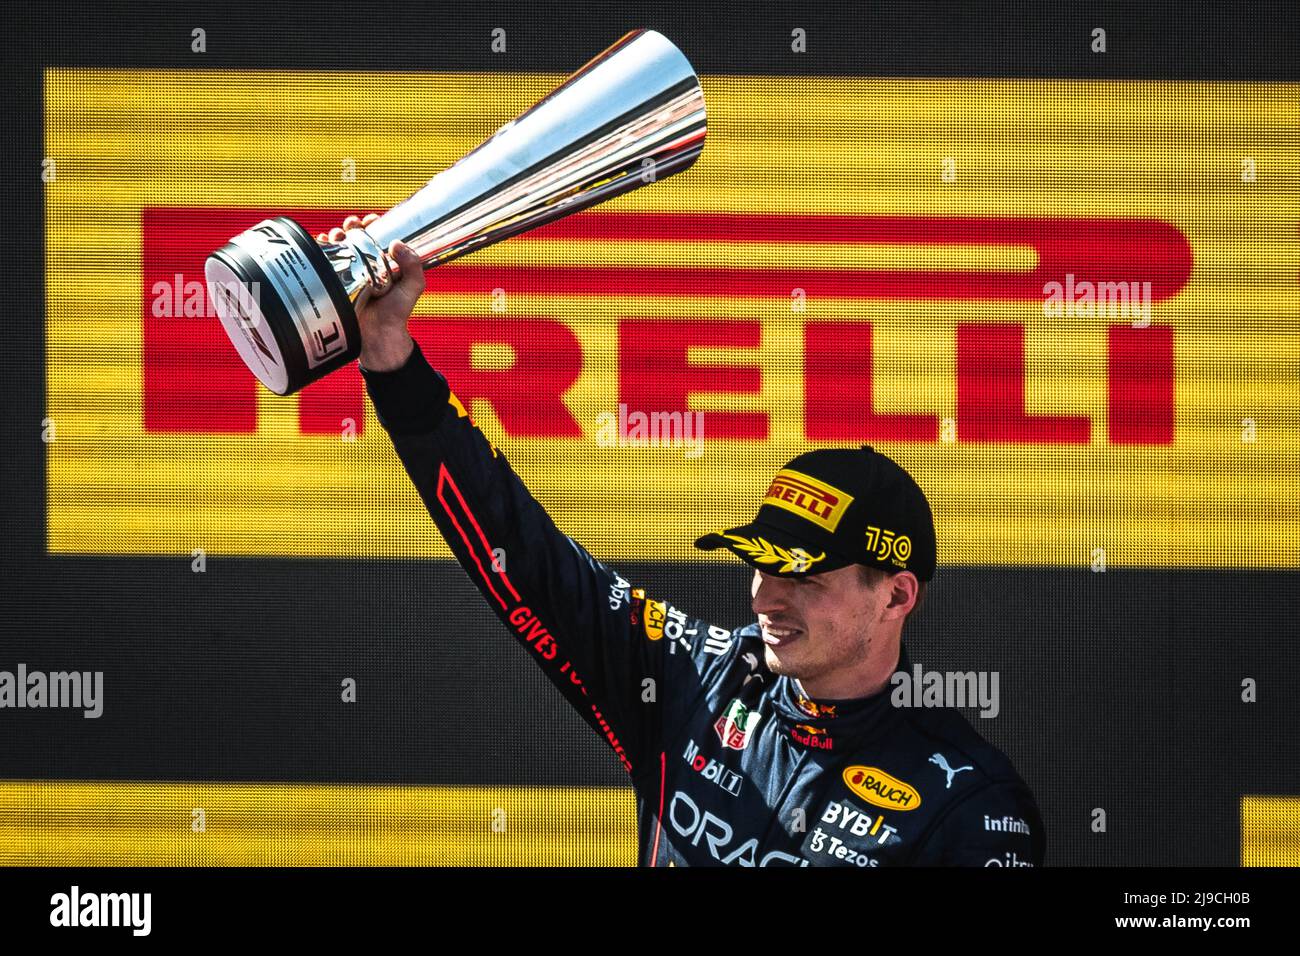 Barcelona, Spain. 22nd May, 2022. MAX VERSTAPPEN (NED) from team Red Bull celebrates his victory of the Spanish GP presenting his cup on the podium at Circuit de Barcelona Catalunya Credit: Matthias Oesterle/Alamy Live News Stock Photo